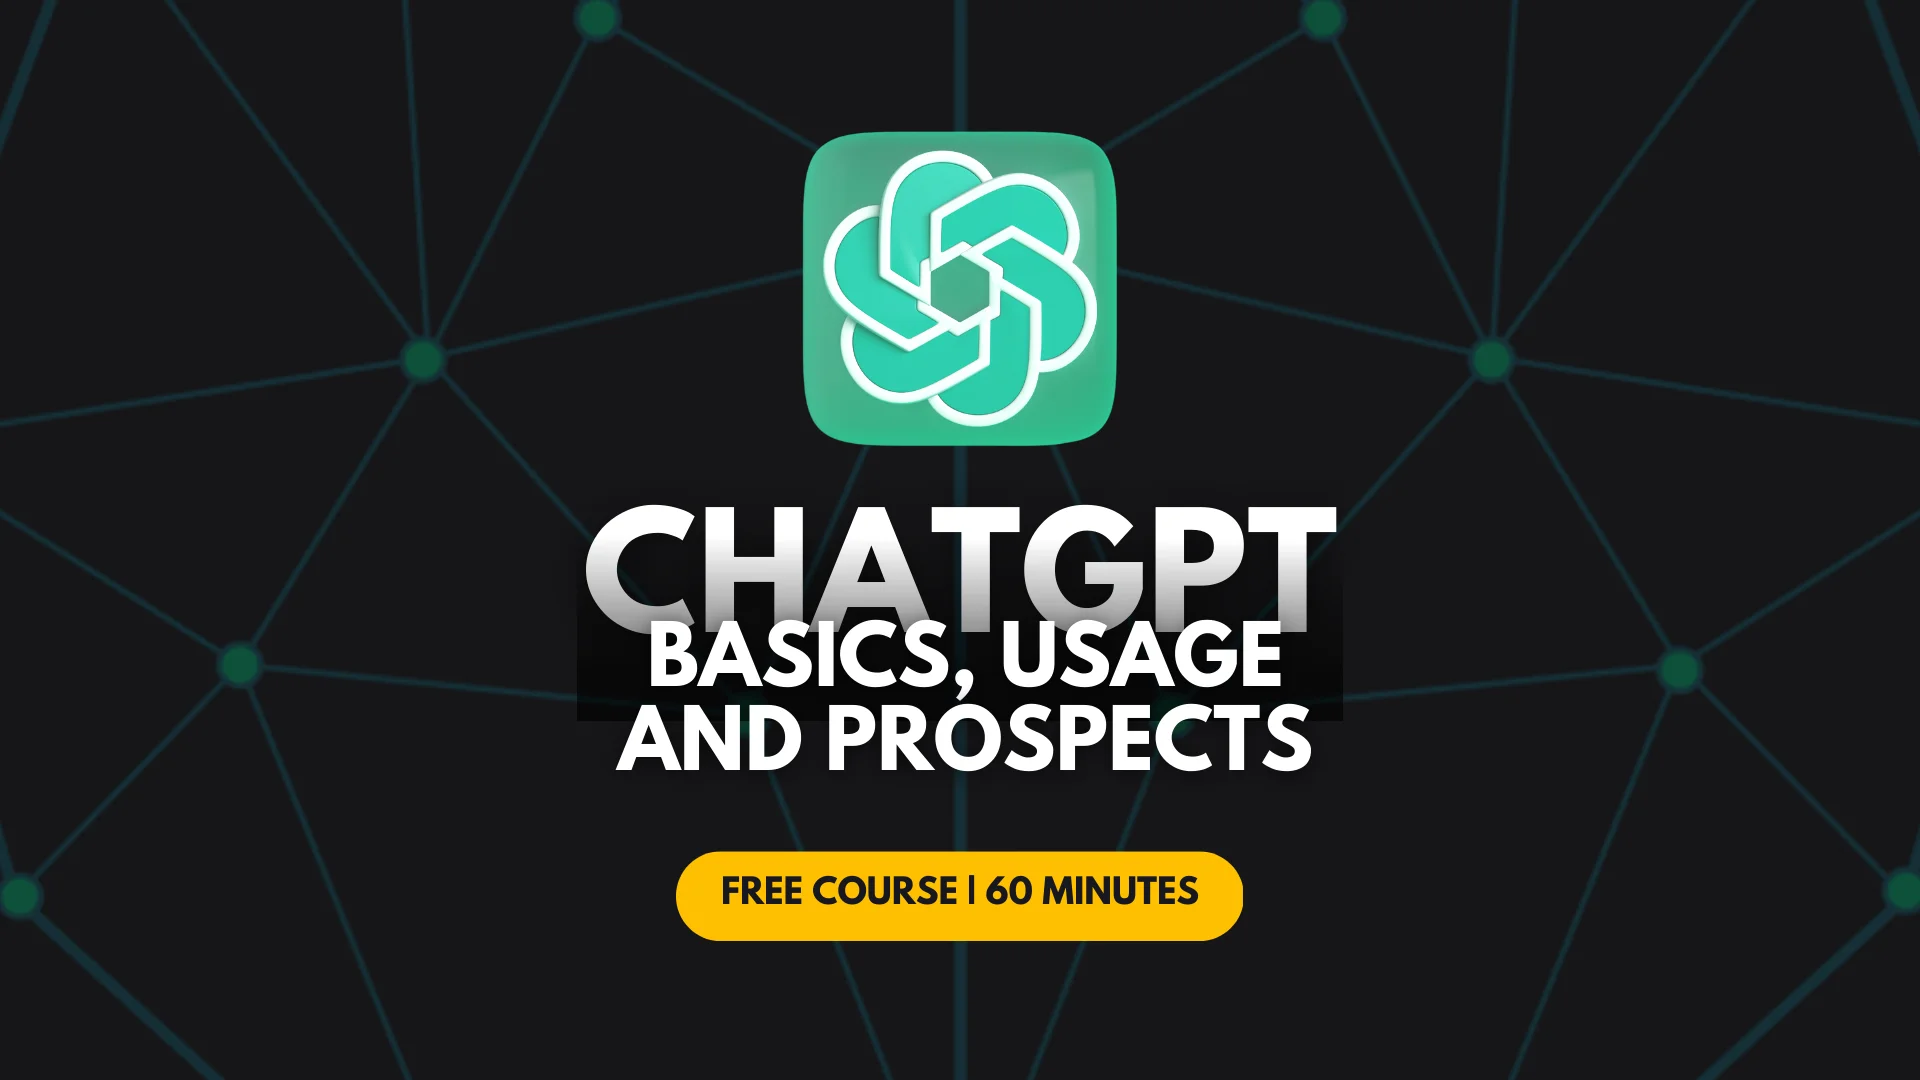 ChatGPT Basics, Usage and Prospects Course Image